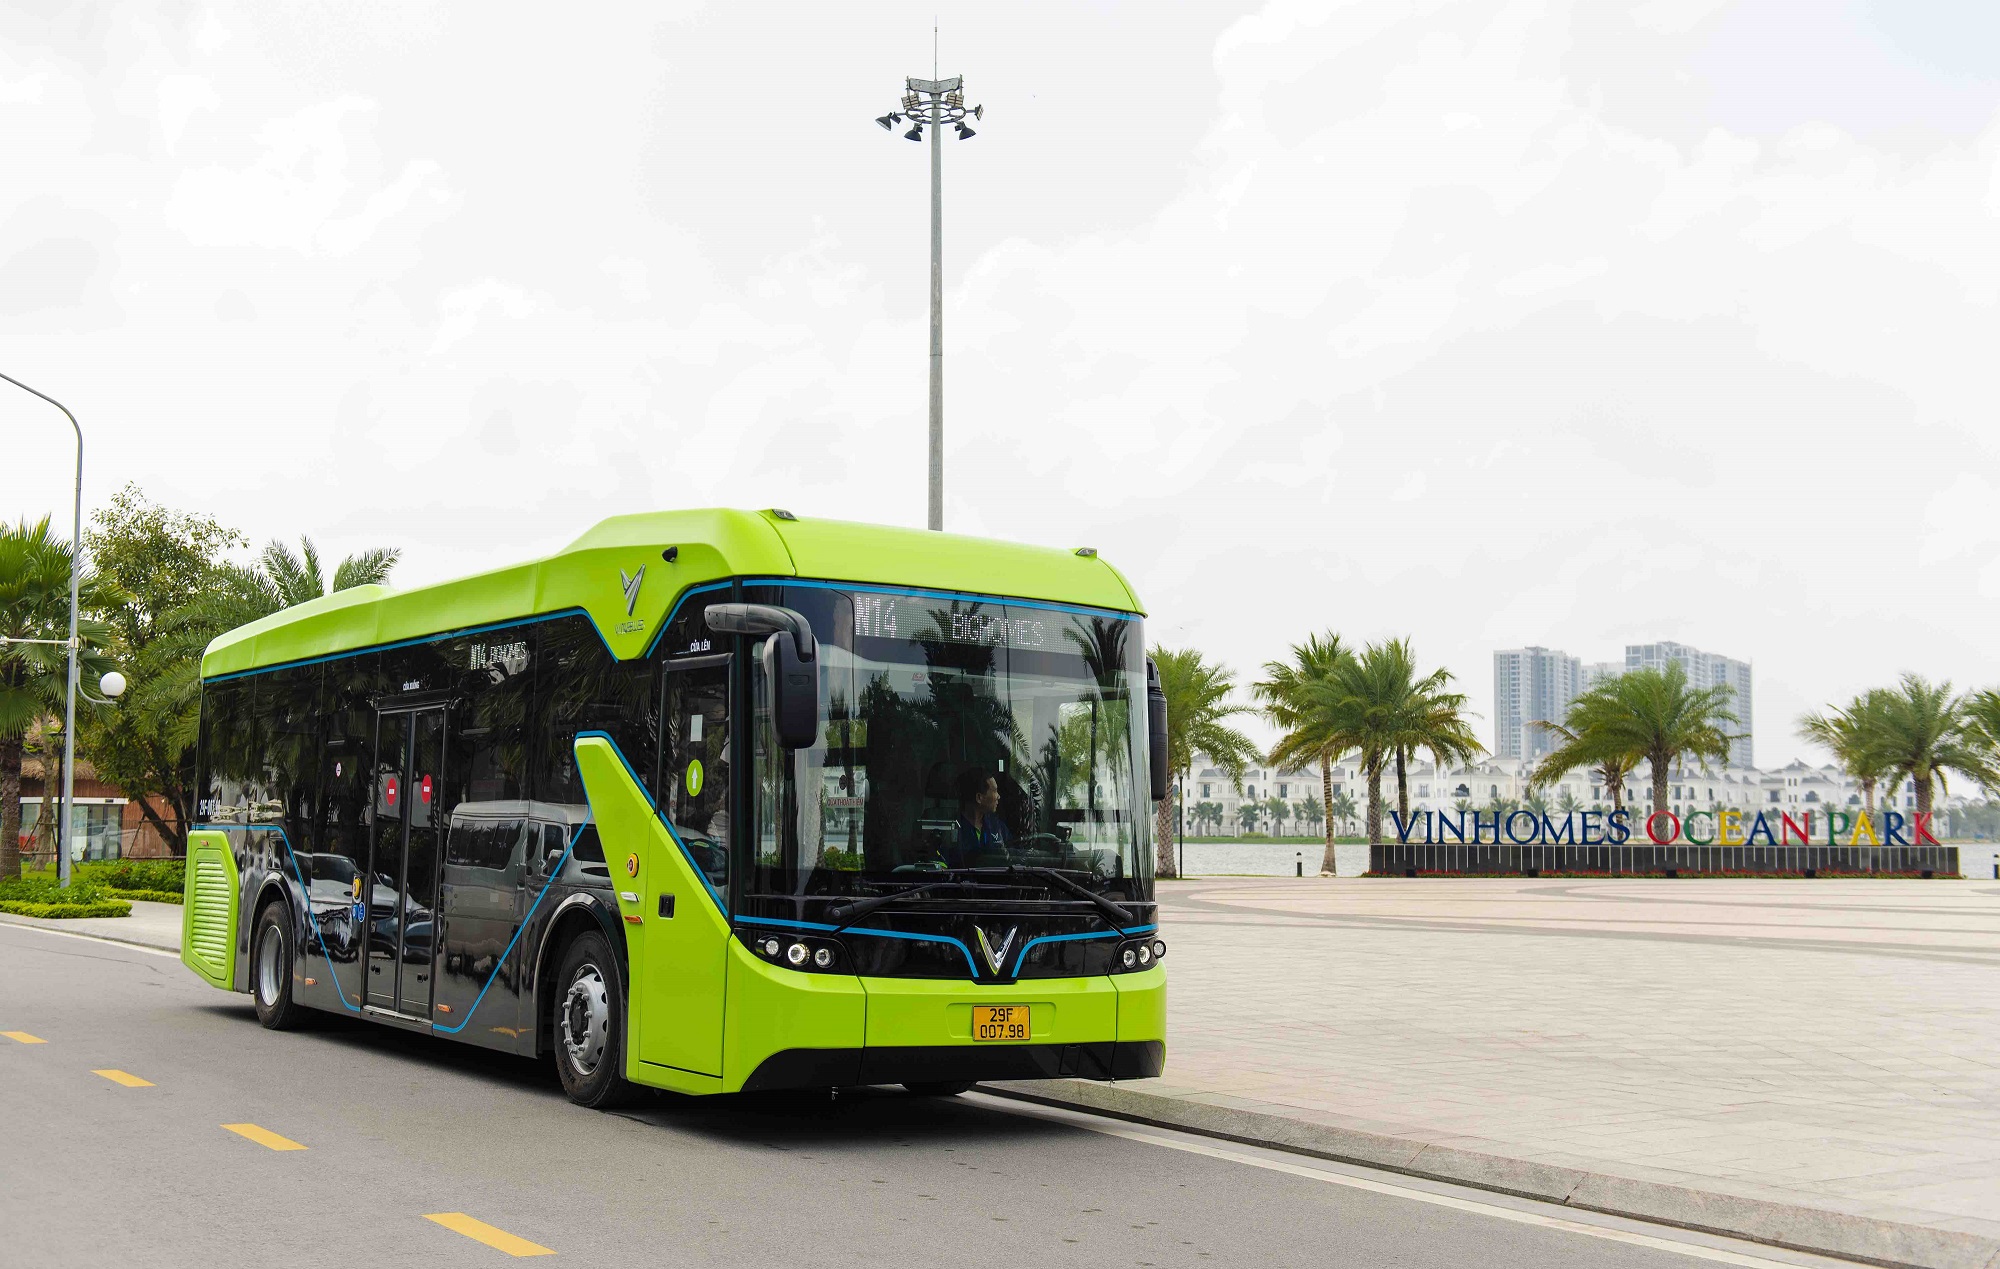 VINBUS OFFICIALLY OPERATES THE FIRST SMART ELECTRIC BUS IN VIETNAM